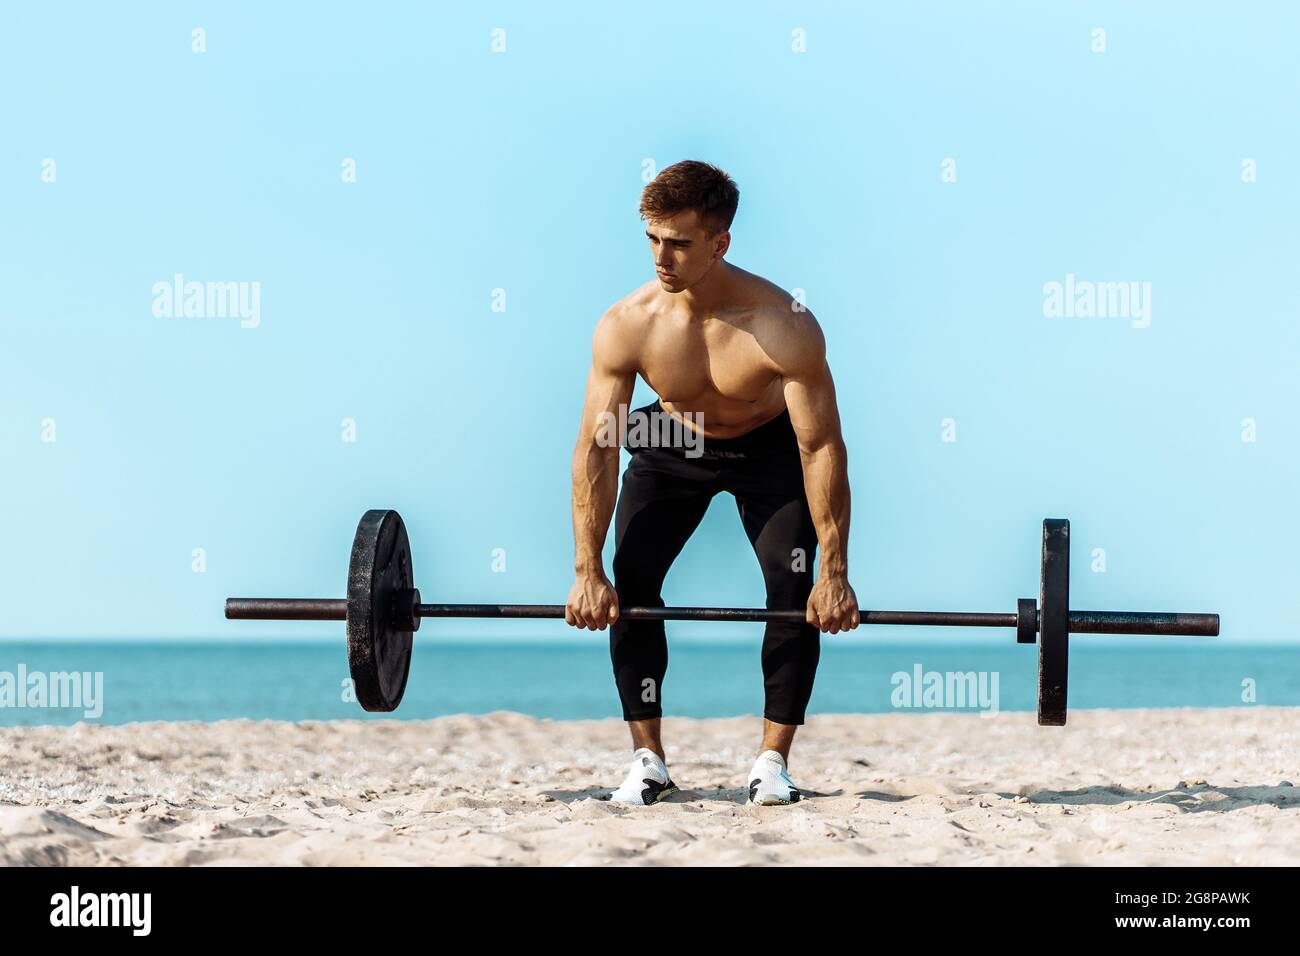 Healthy handsome active man with fit muscular body, young muscular man lifting weights, doing exercises, Sporty man exercising on the beach, Outdoor t Stock Photo